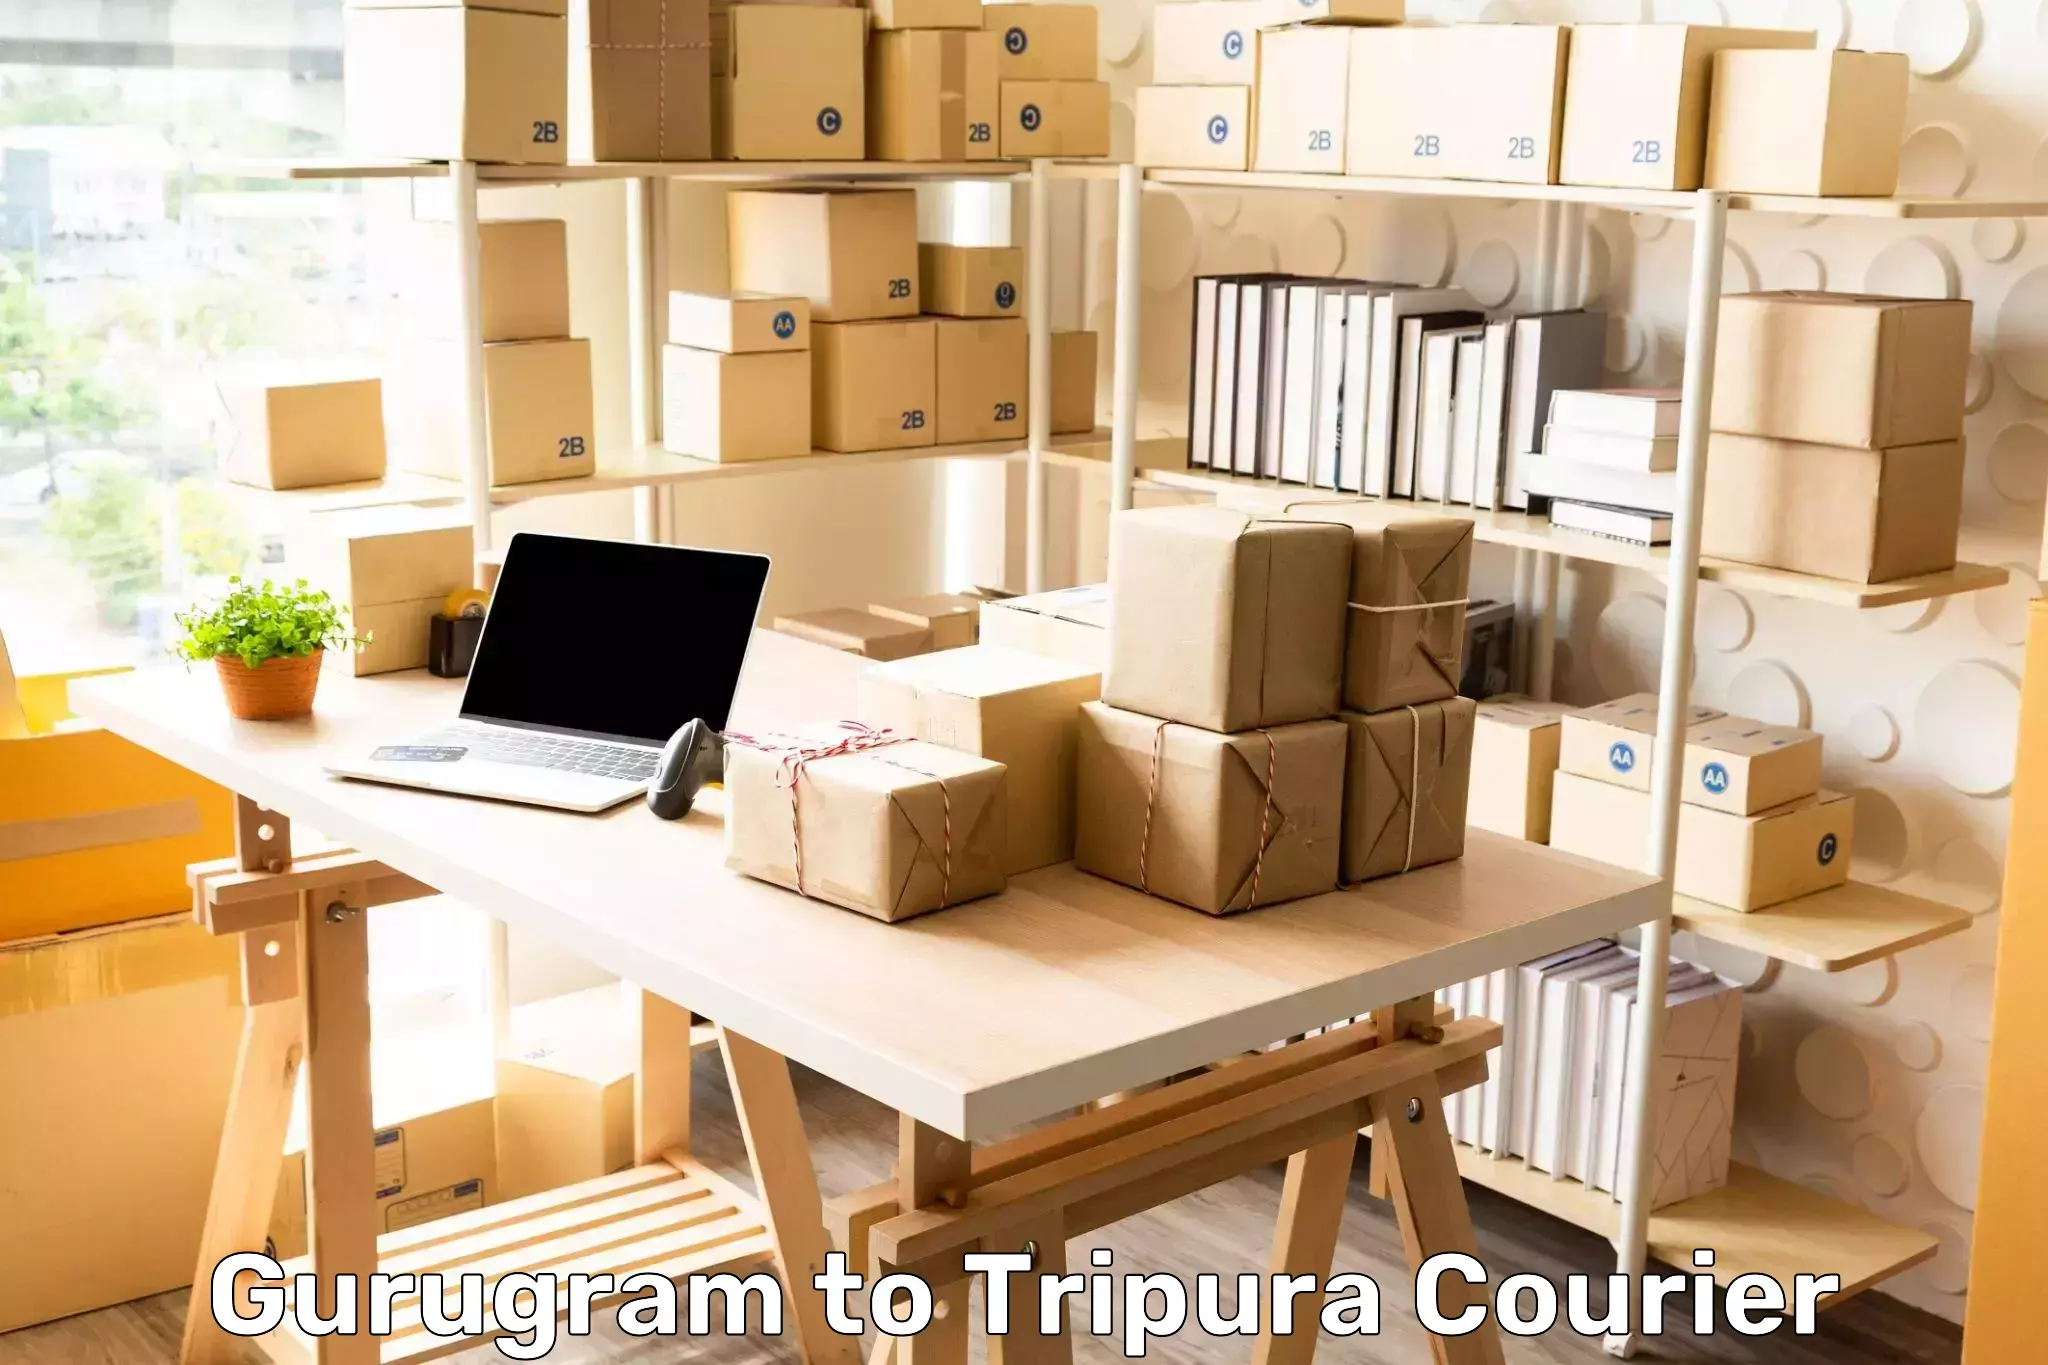 Flexible delivery scheduling Gurugram to Udaipur Tripura